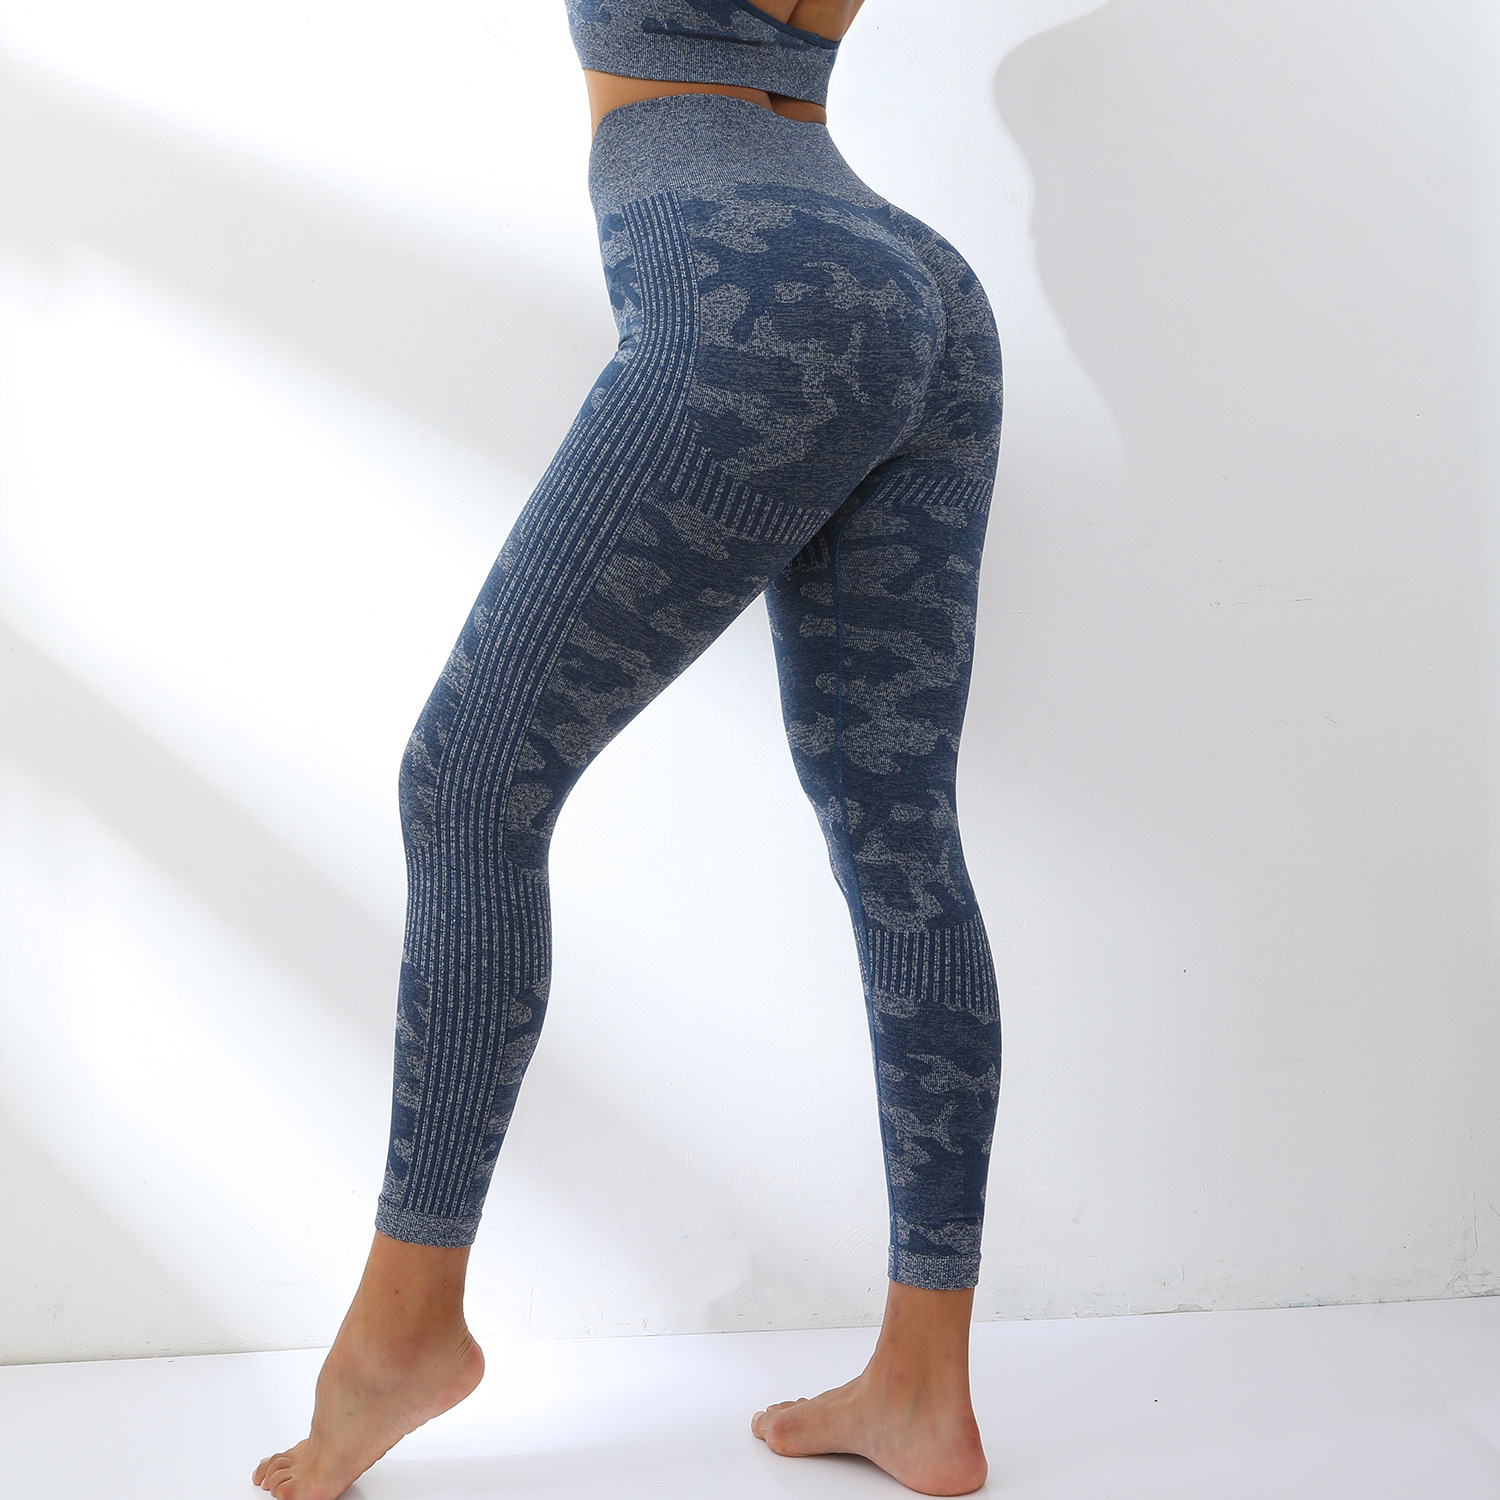 Moisture wicking hip lifting running fitness tight bottomed Yoga Pants